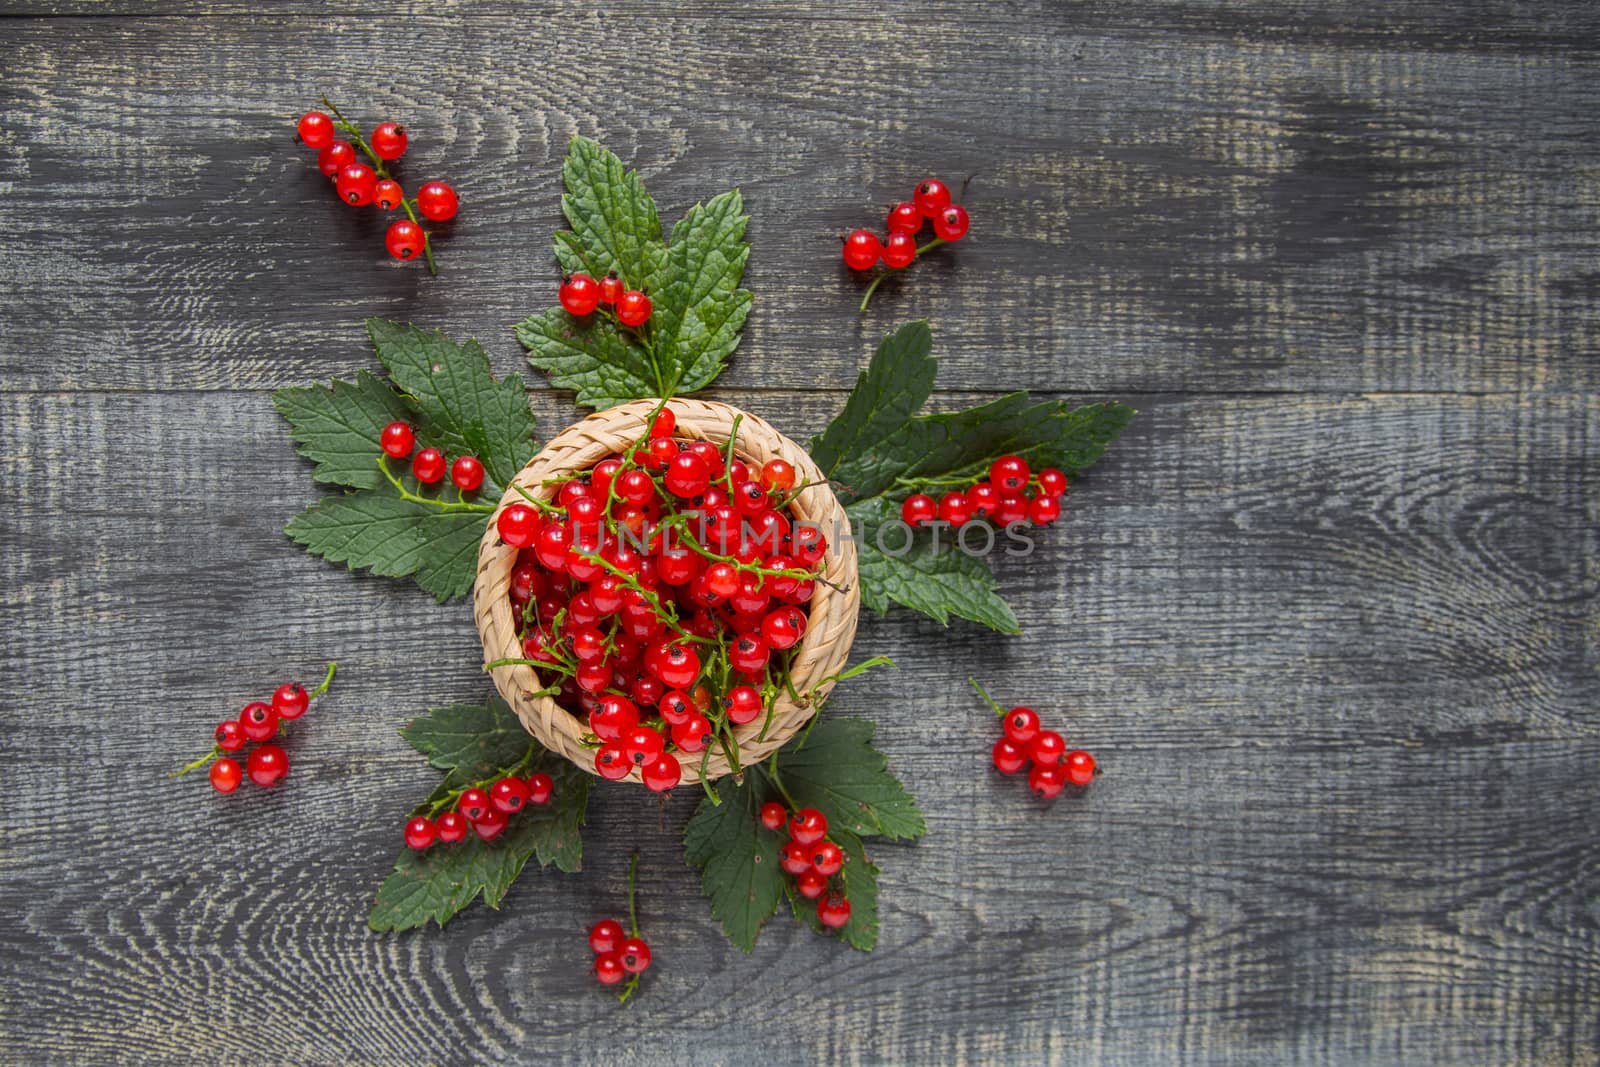 red currant berries in a ceramic bowl on a rustic wooden background. close up and selective focus